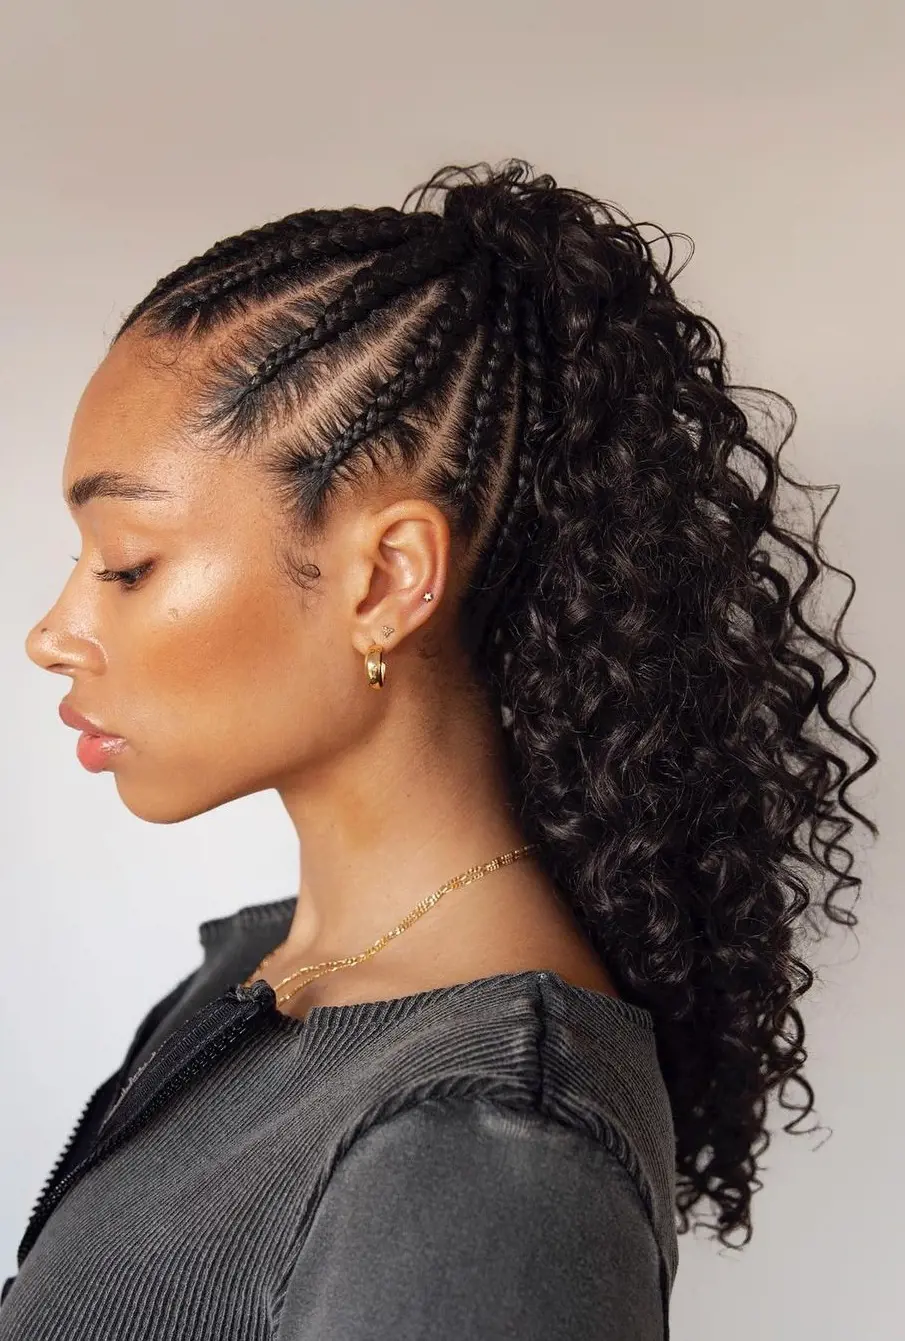 The braided half-back style involves braiding a section of hair along the crown of the head and securing it at the back